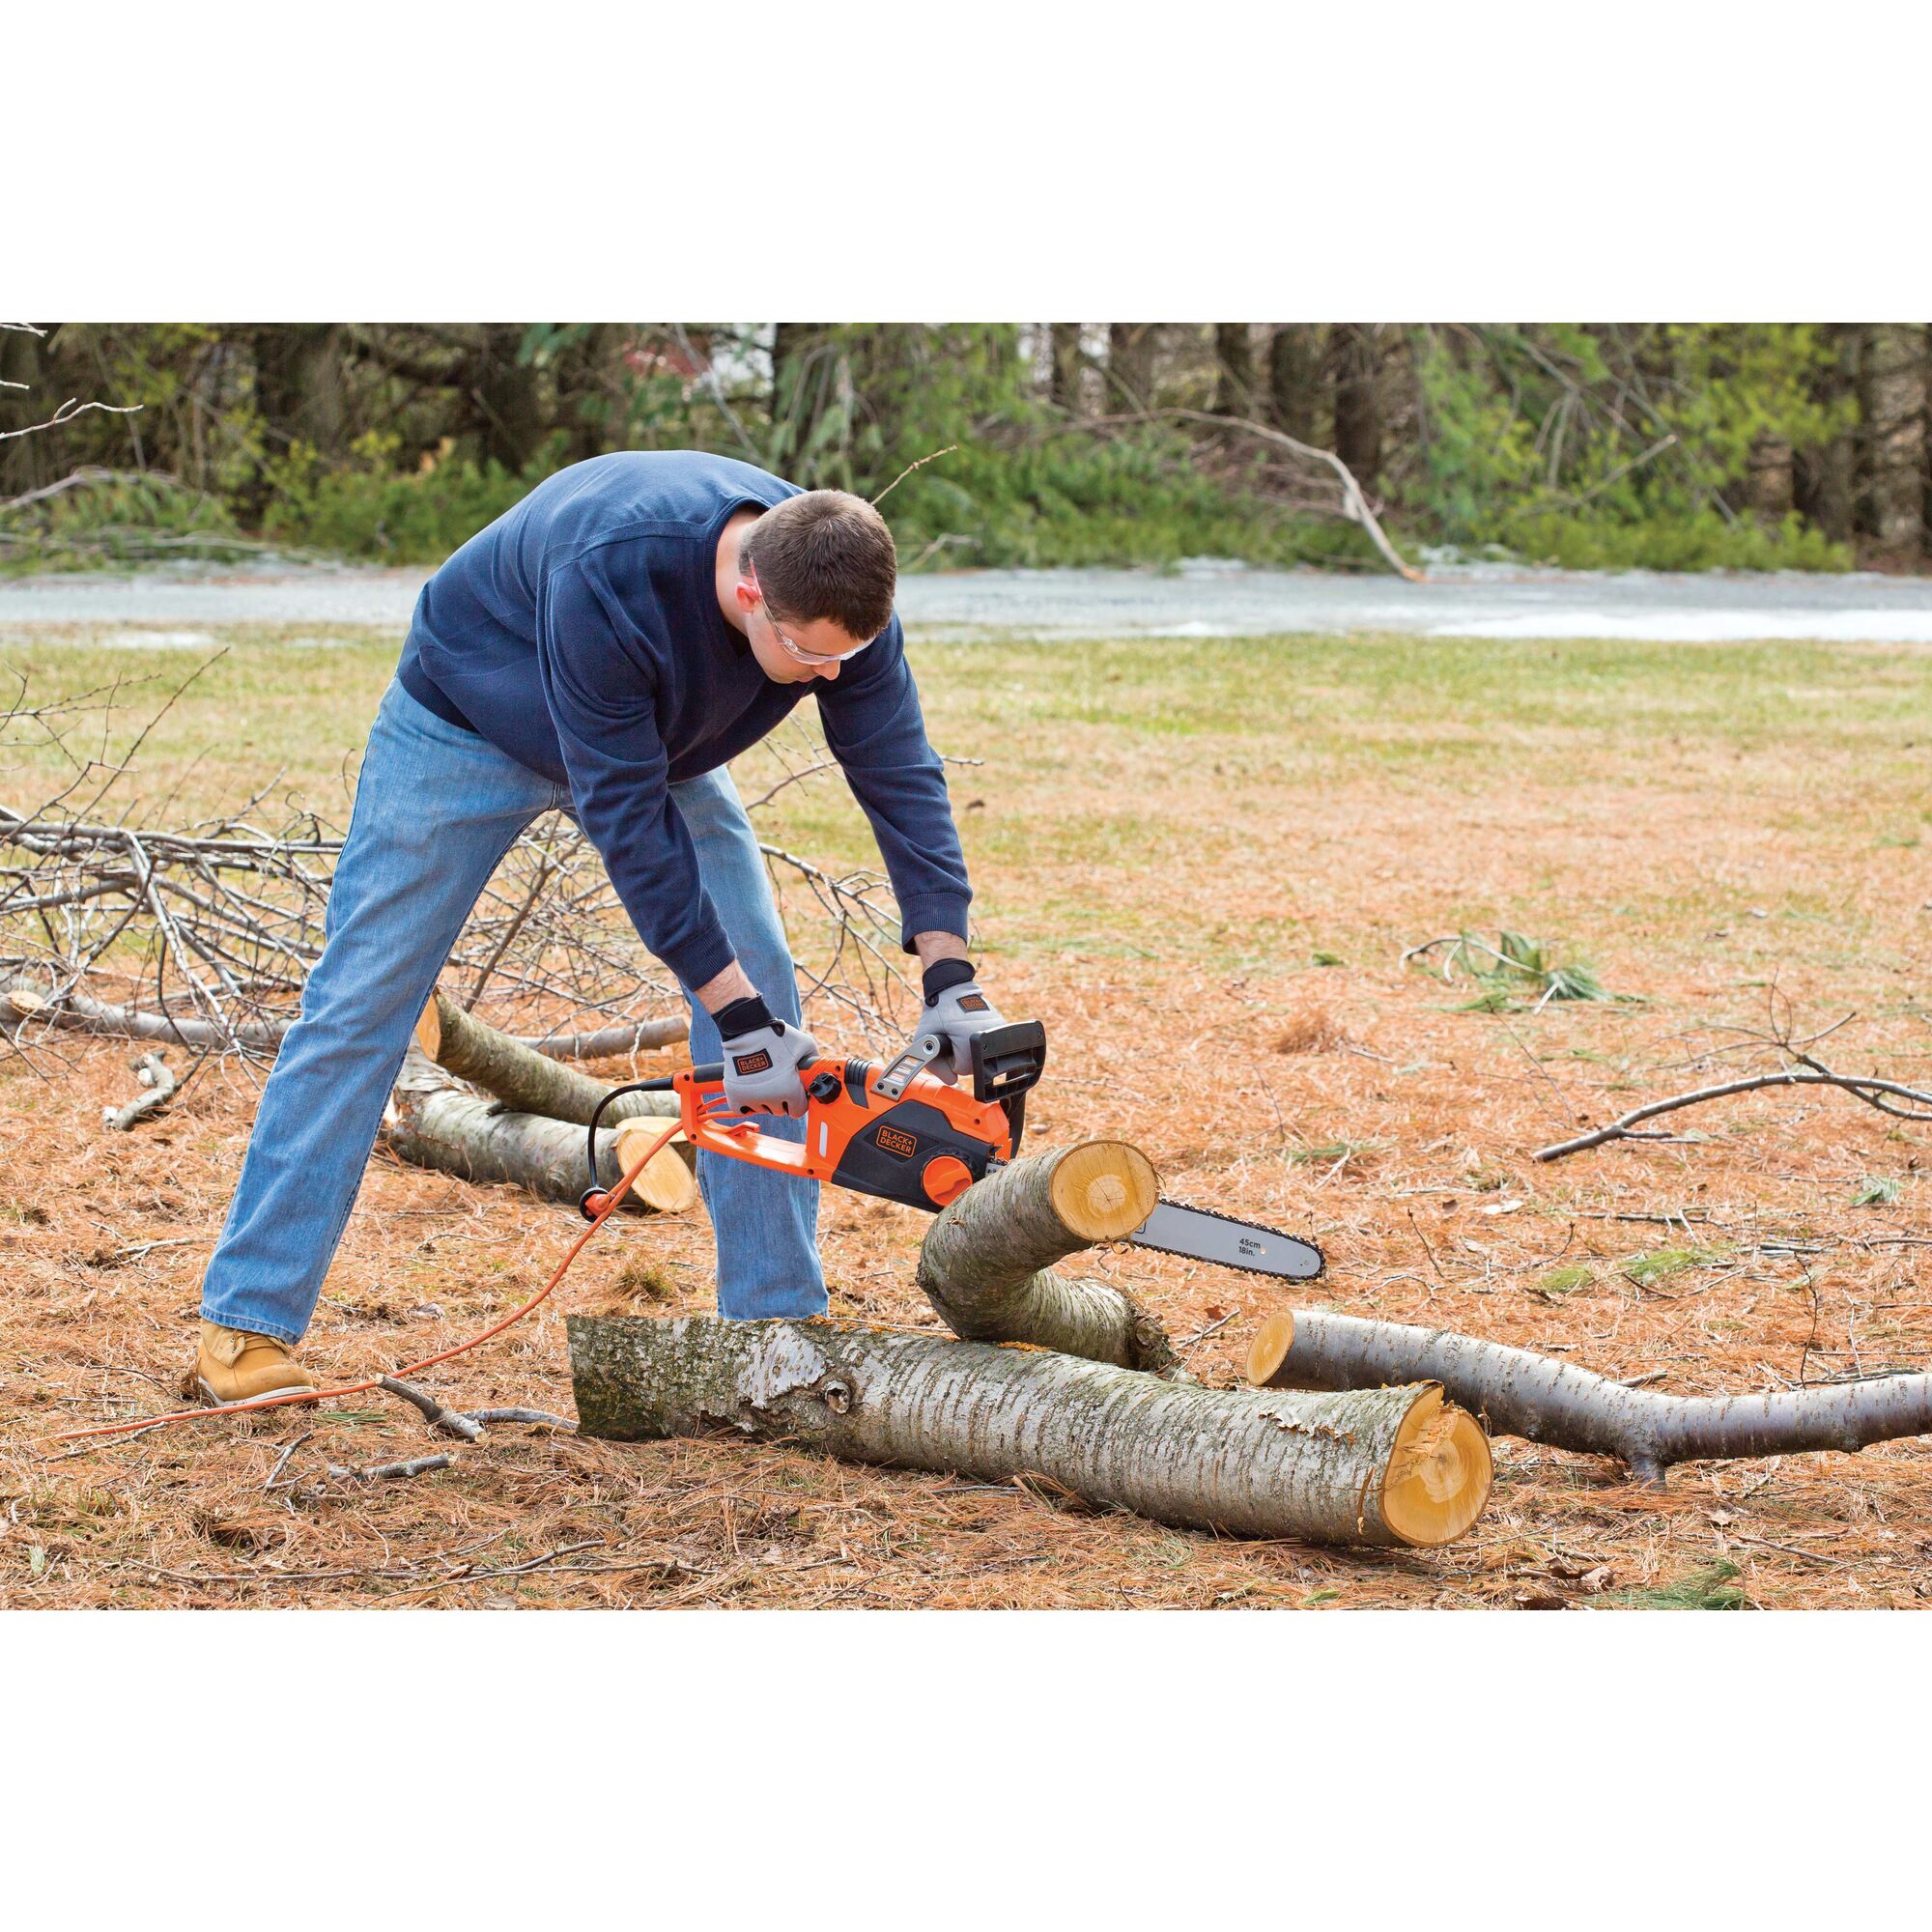 15 Amp 18 inch Chainsaw being used to cut thick tree branch into logs.